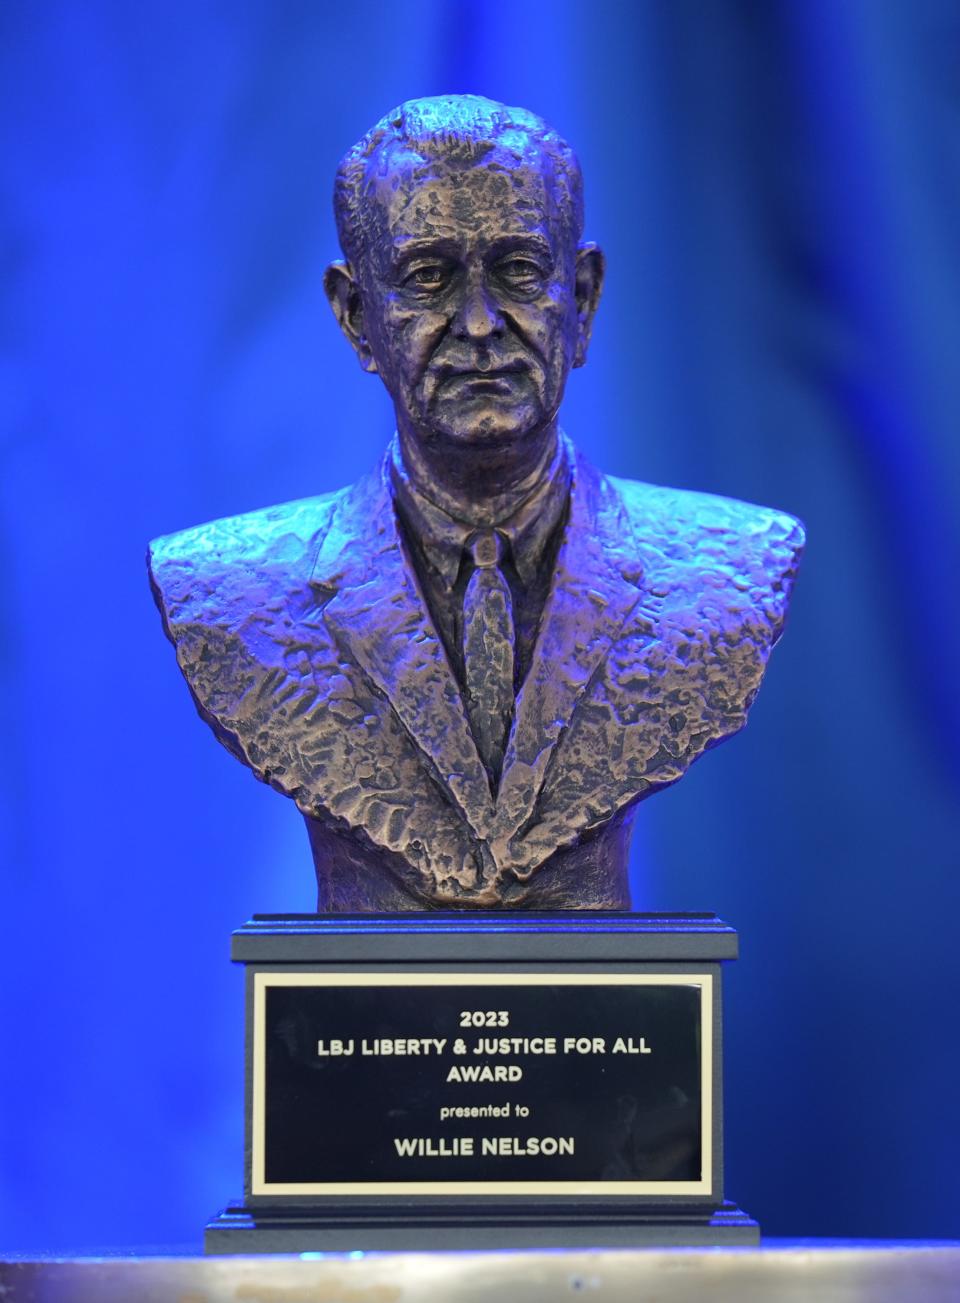 Willie Nelson received the LBJ Liberty and Justice For All Award, a rather large bust of the late president, at a gala and musical tribute at the LBJ Presidential Library.